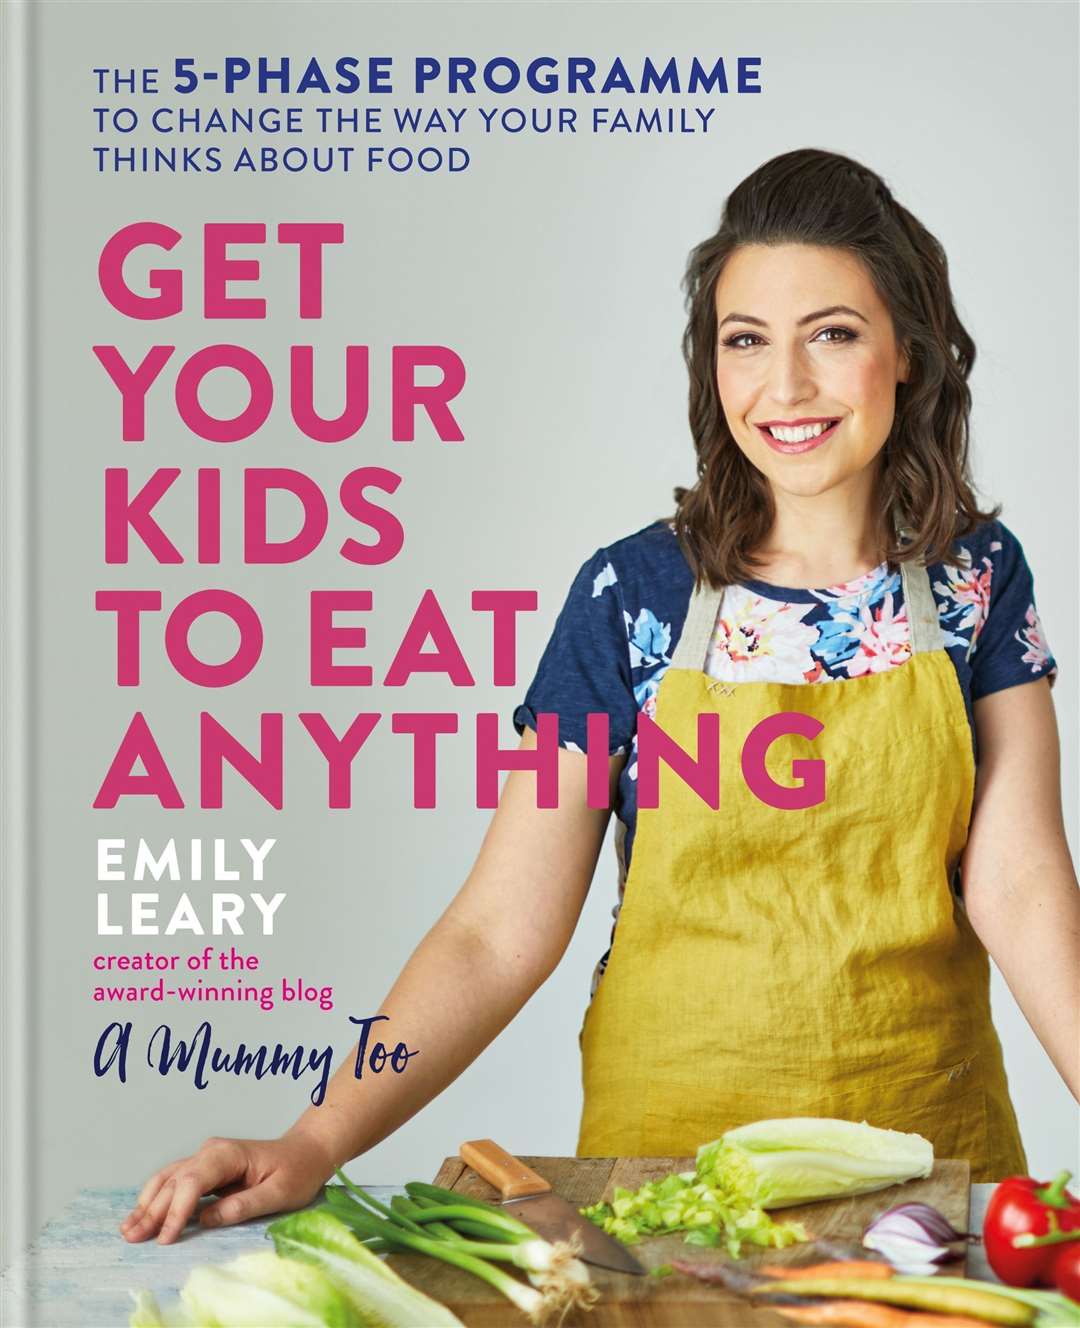 Get Your Kids To Eat Anything by Emily Leary is pulished this week by Mitchell Beazley, £16.99